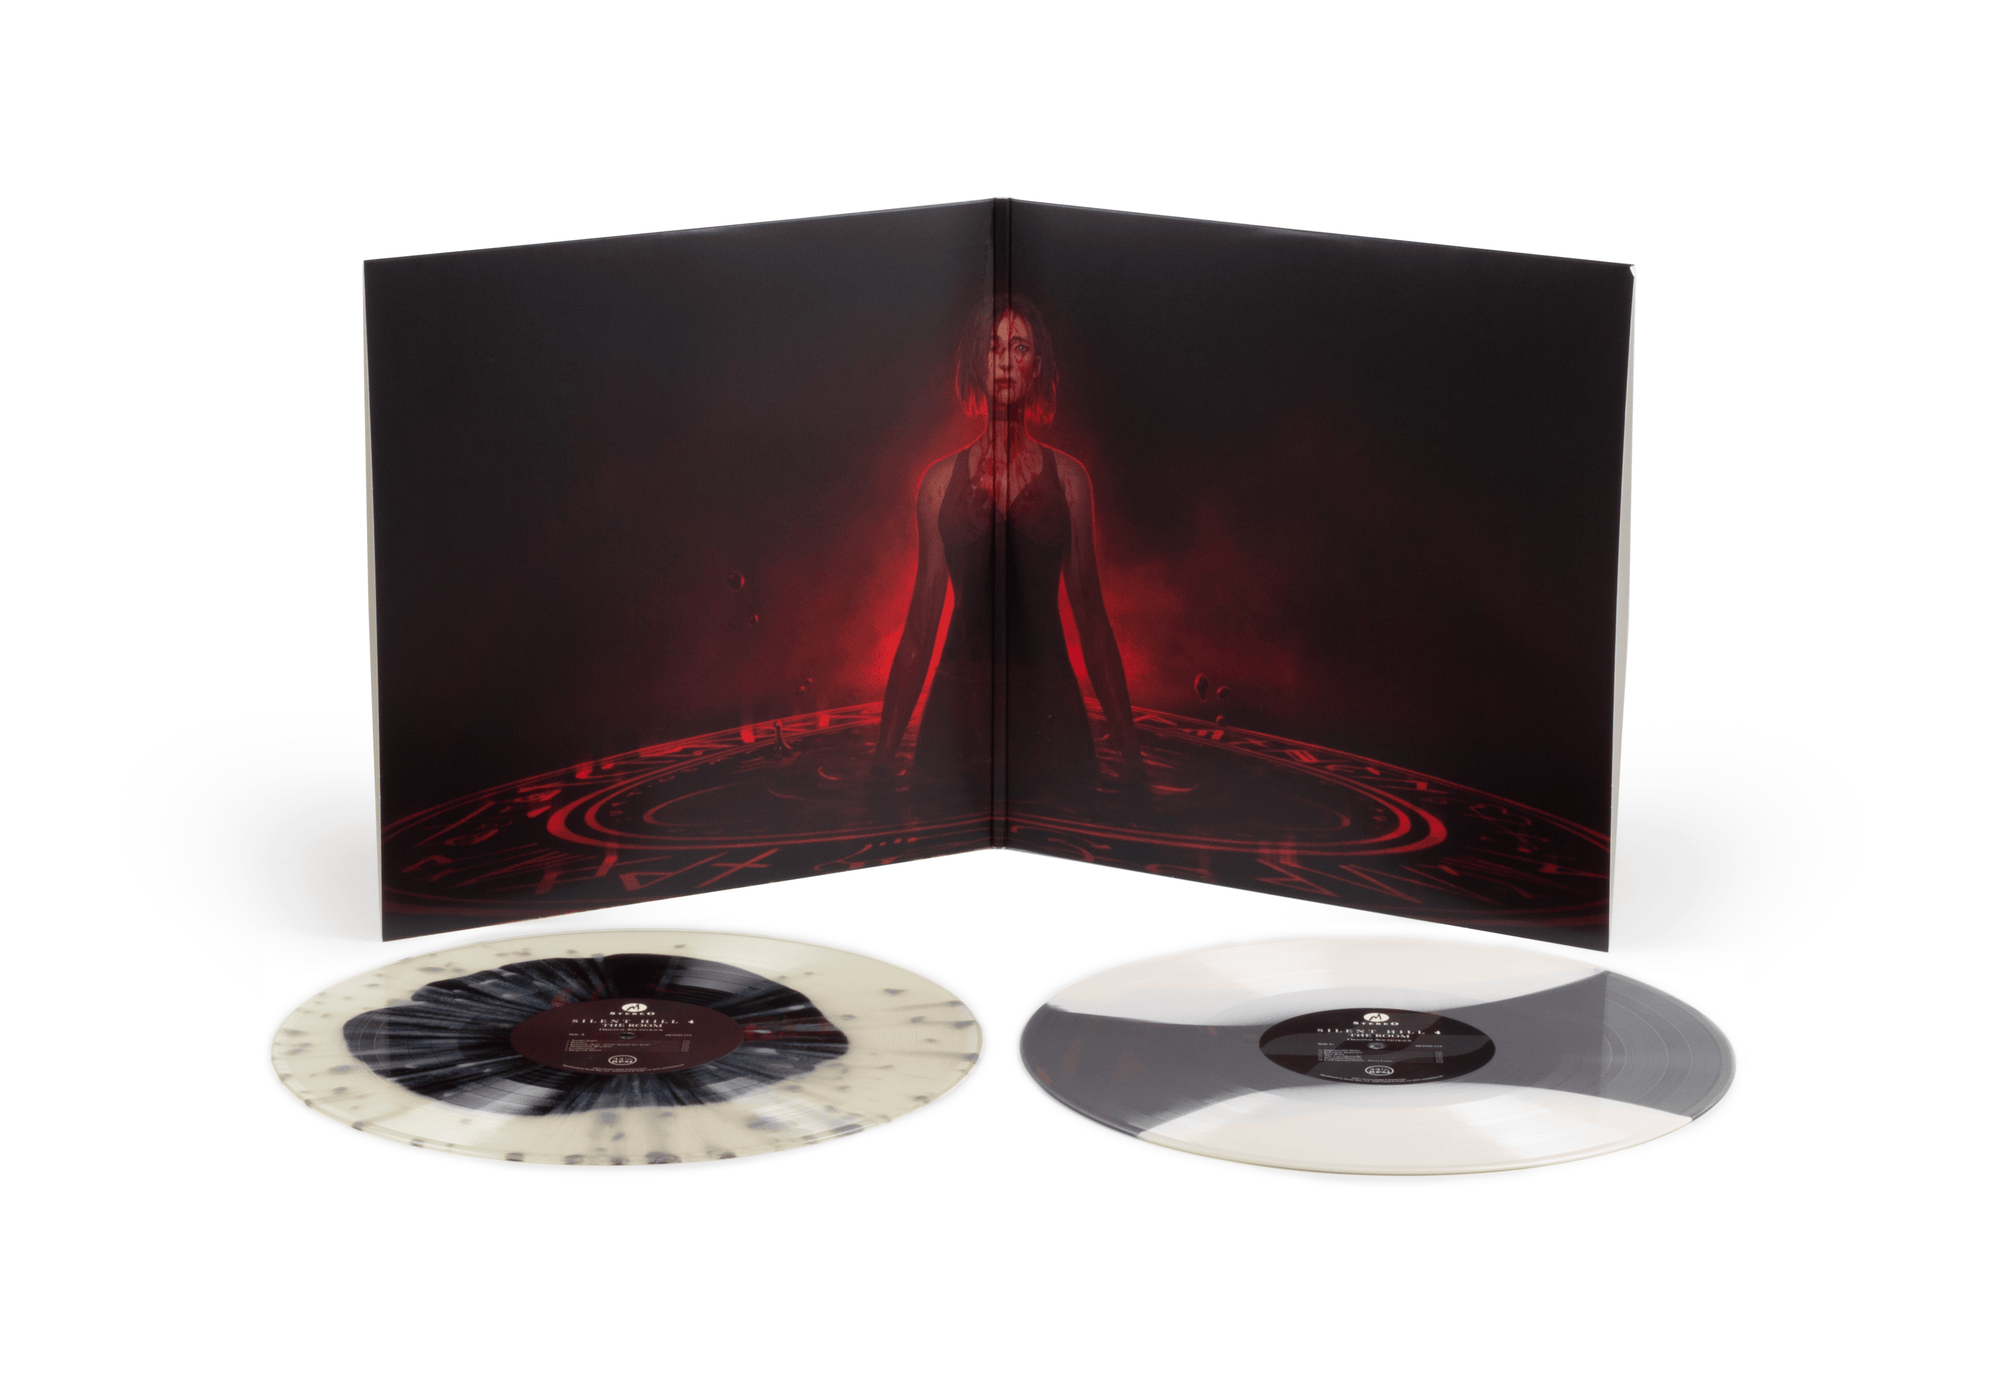 Mondo Announces Silent Hill 3 and Silent Hill 4 Vinyl OSTs - Rely on Horror